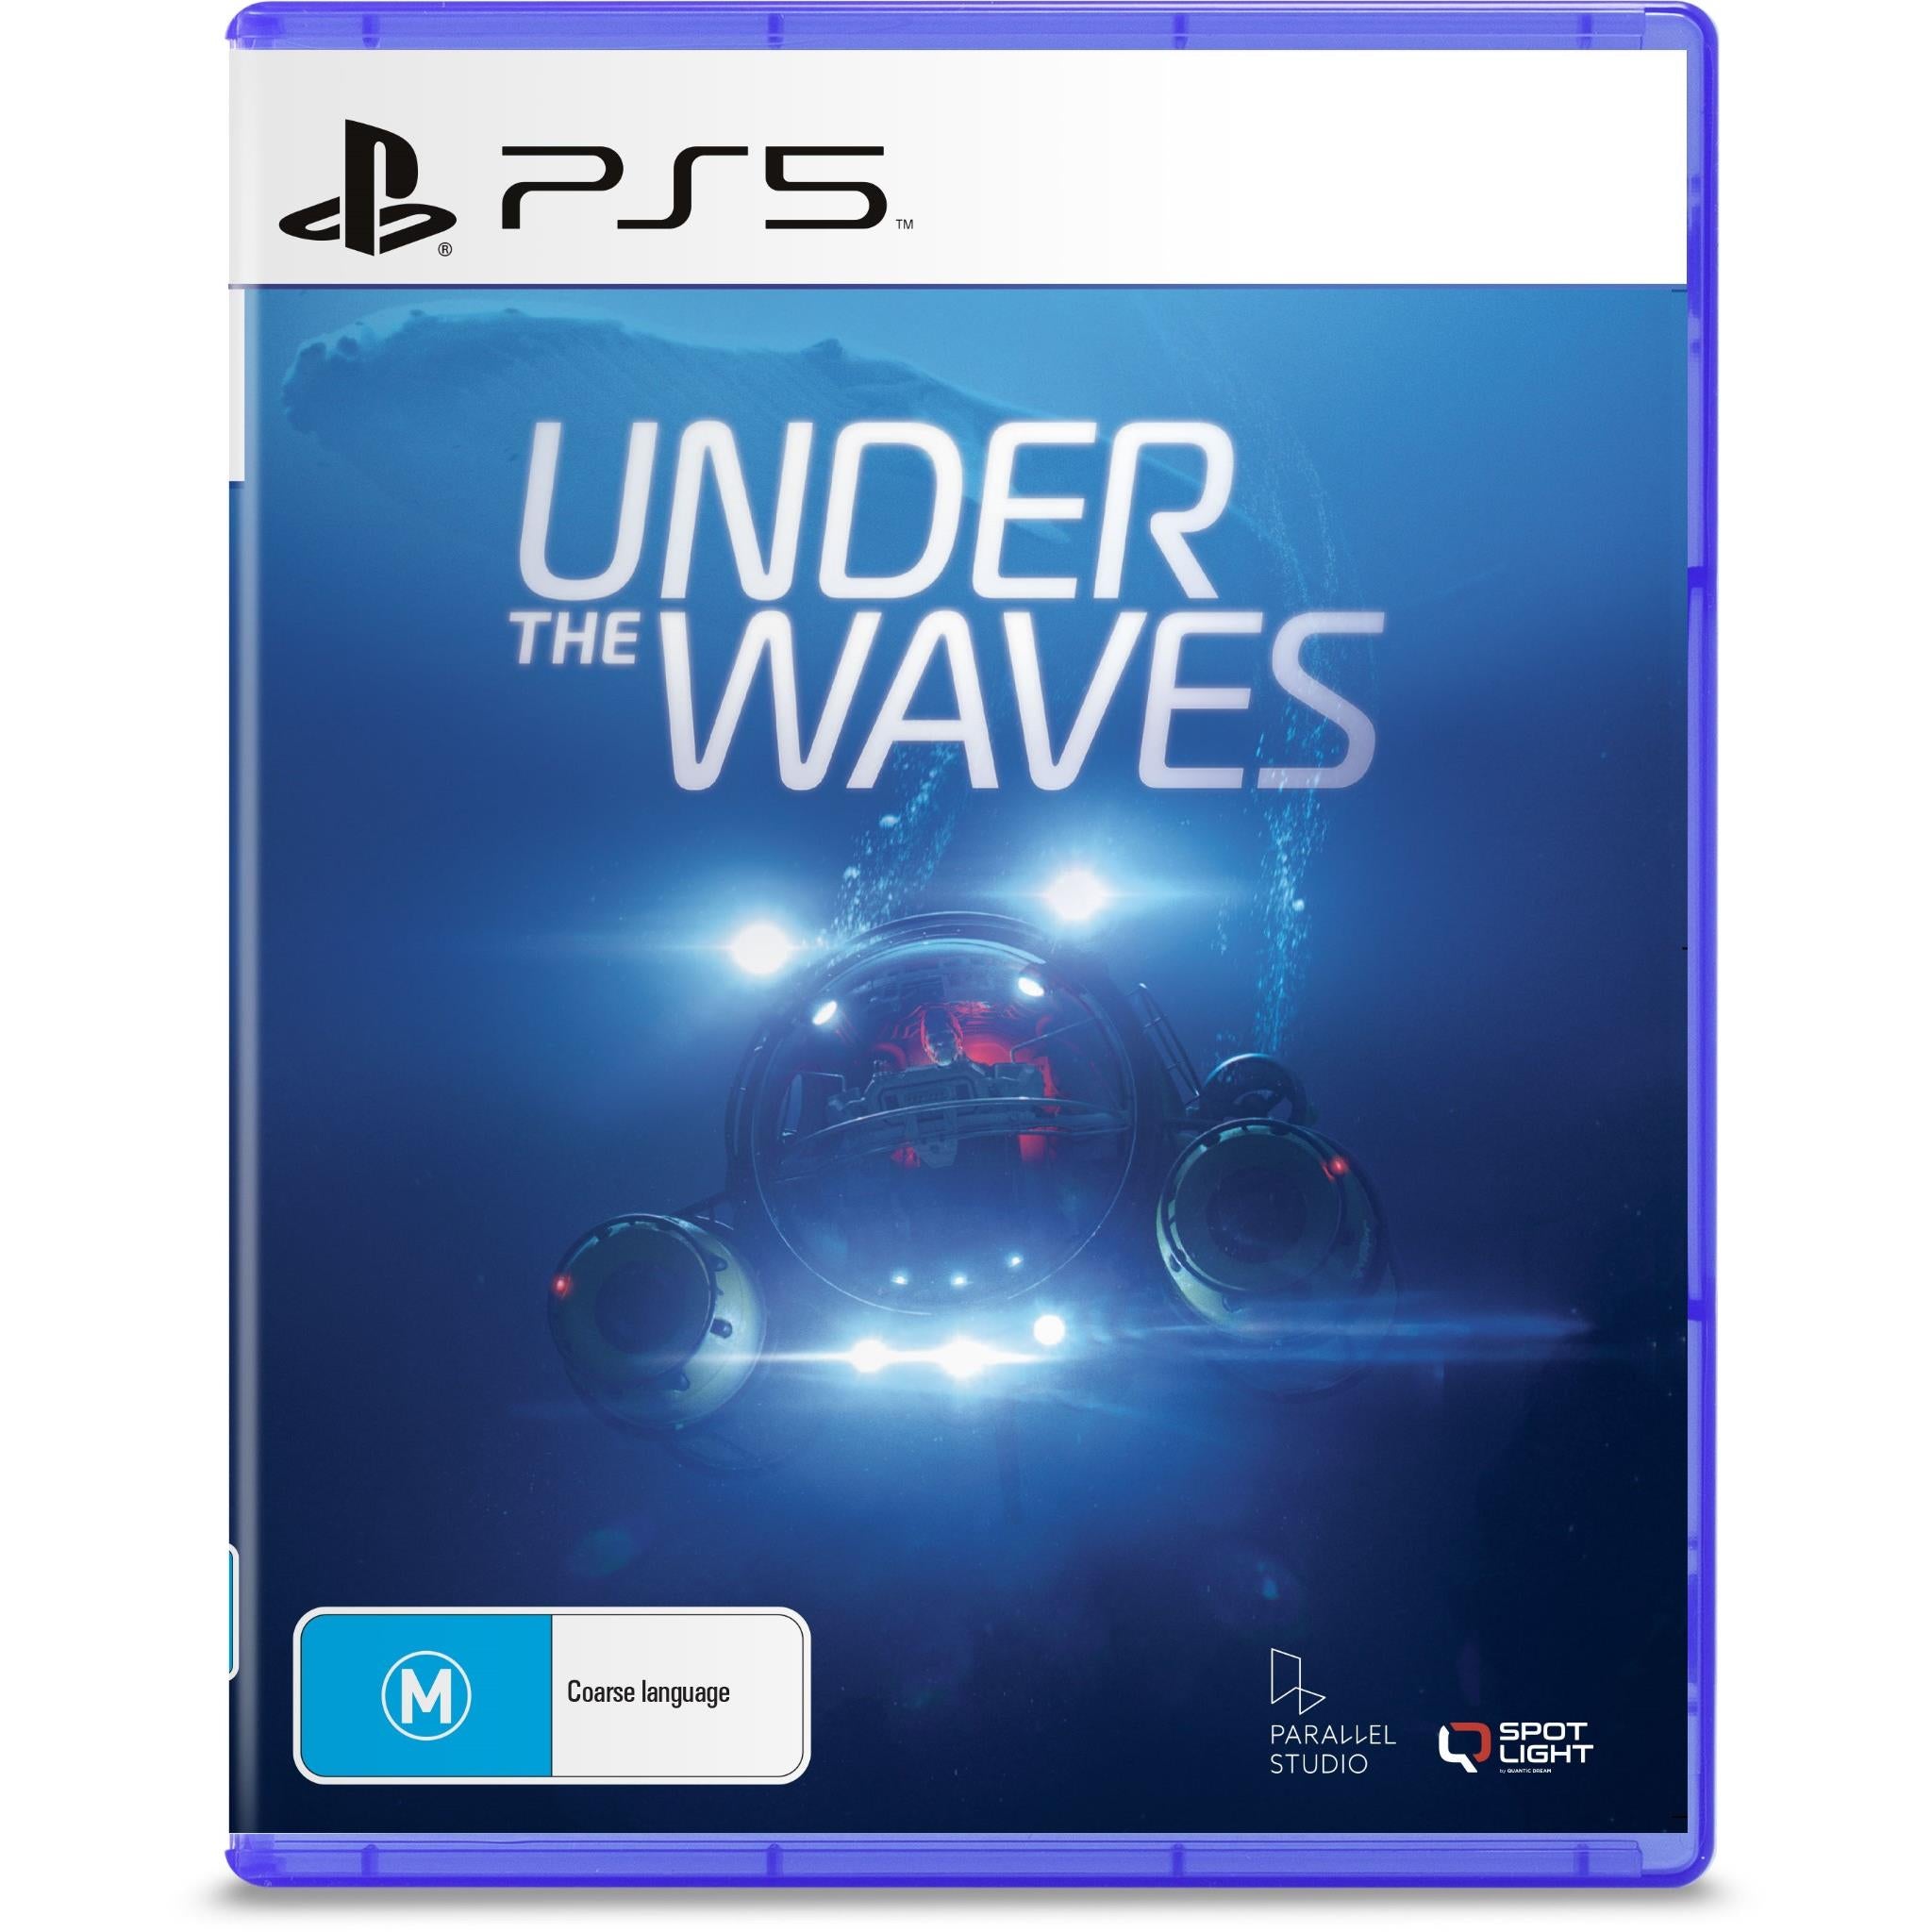 under the waves